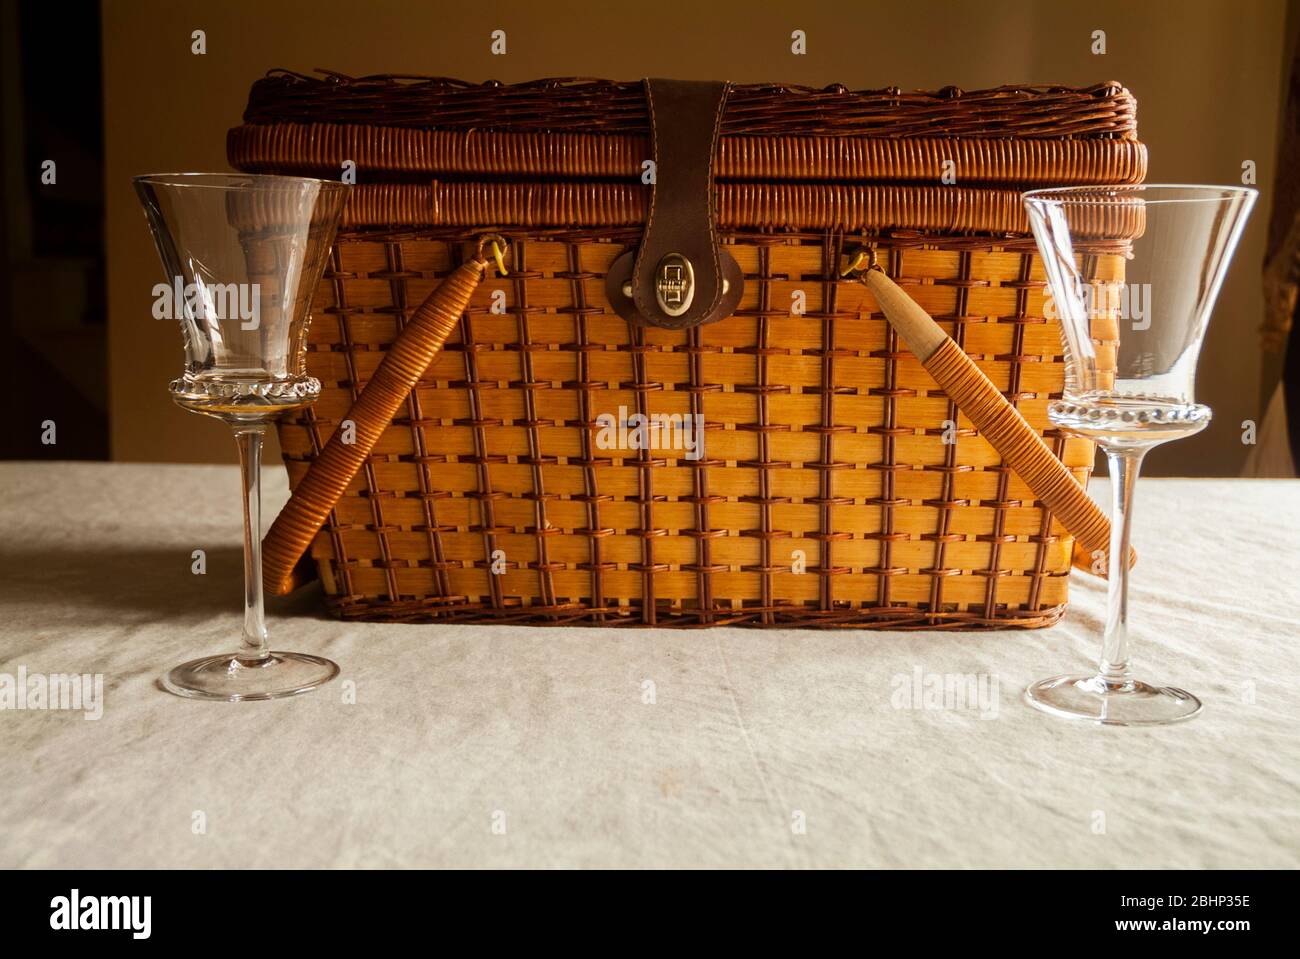 DATE NIGHT: Two wine glasses stand side by side in front of a picnic basket on a kitchen table. Stock Photo